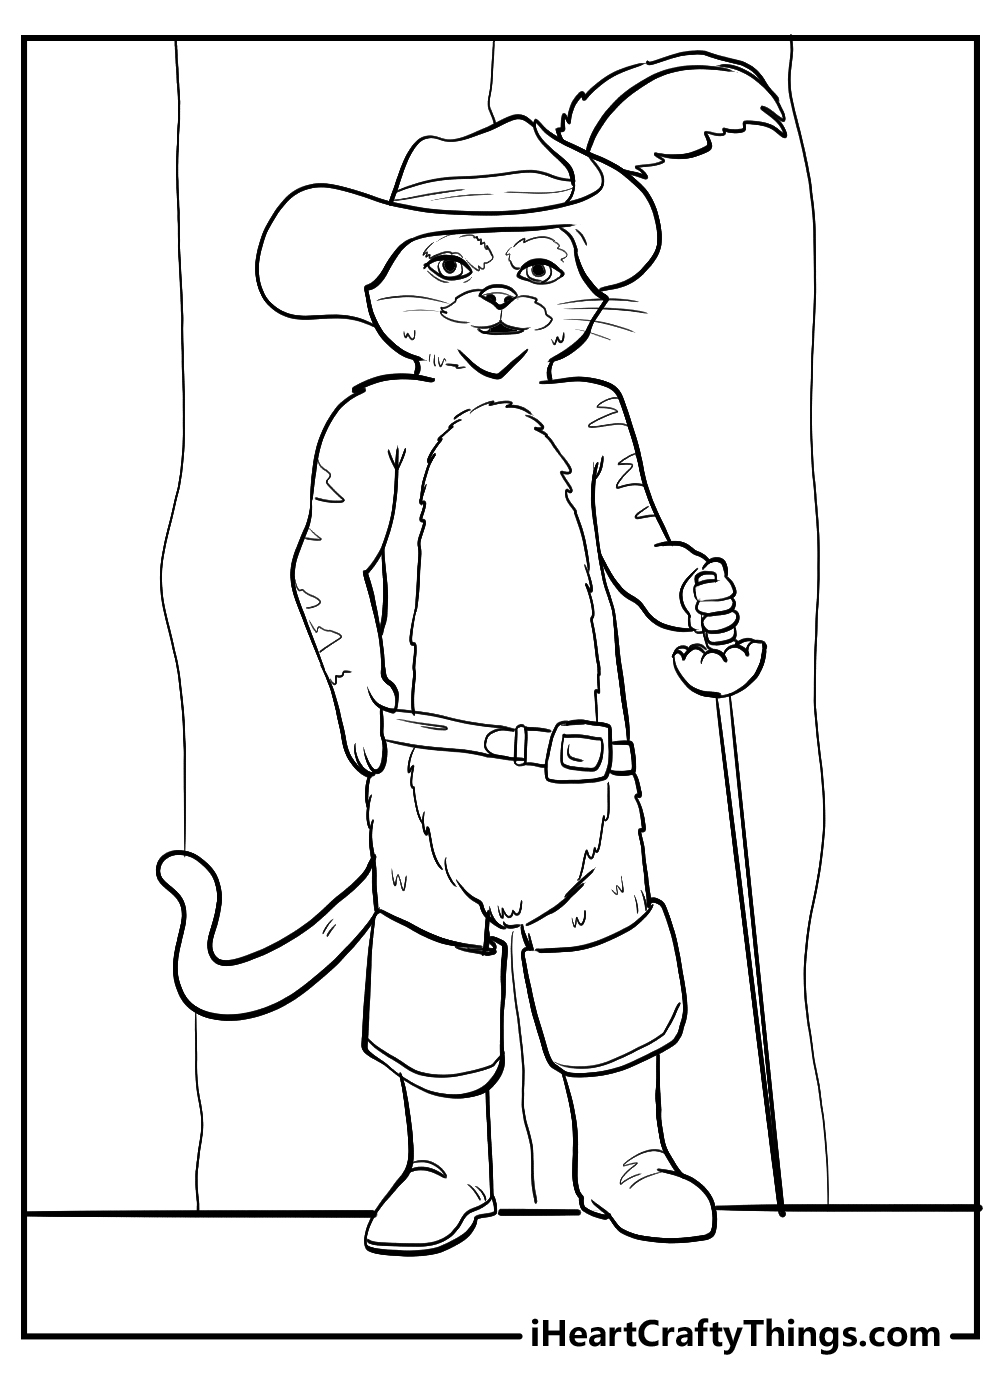 coloring puss in boots free pdf download